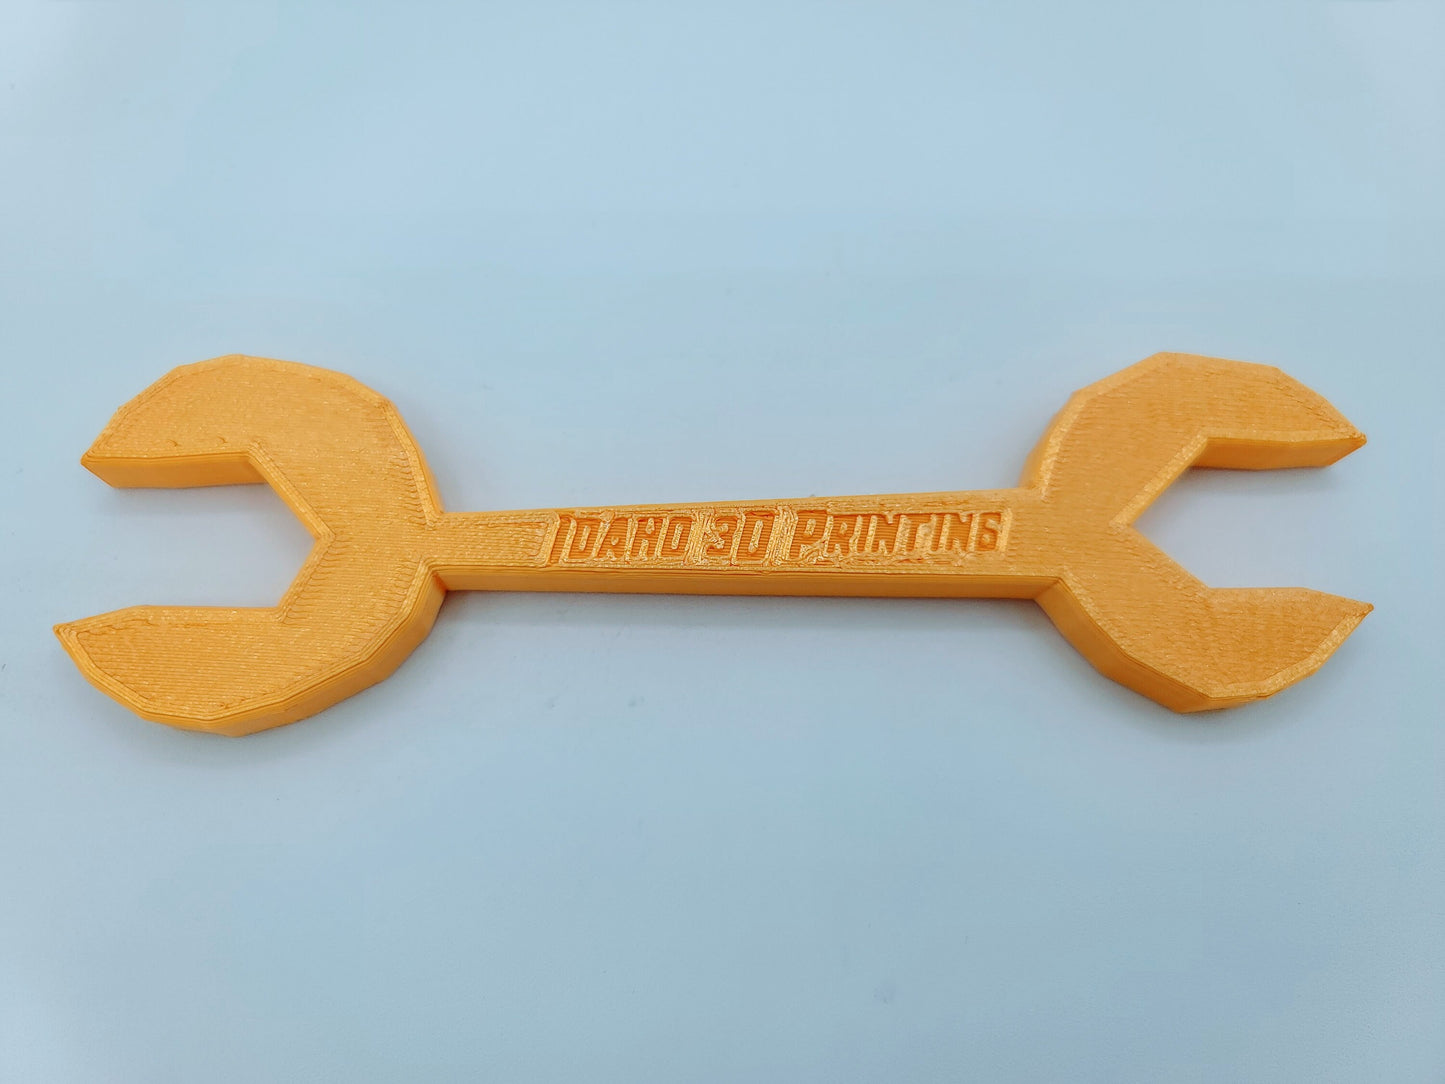 Toy Wrenches - Proudly made in the USA - Hello Neighbor